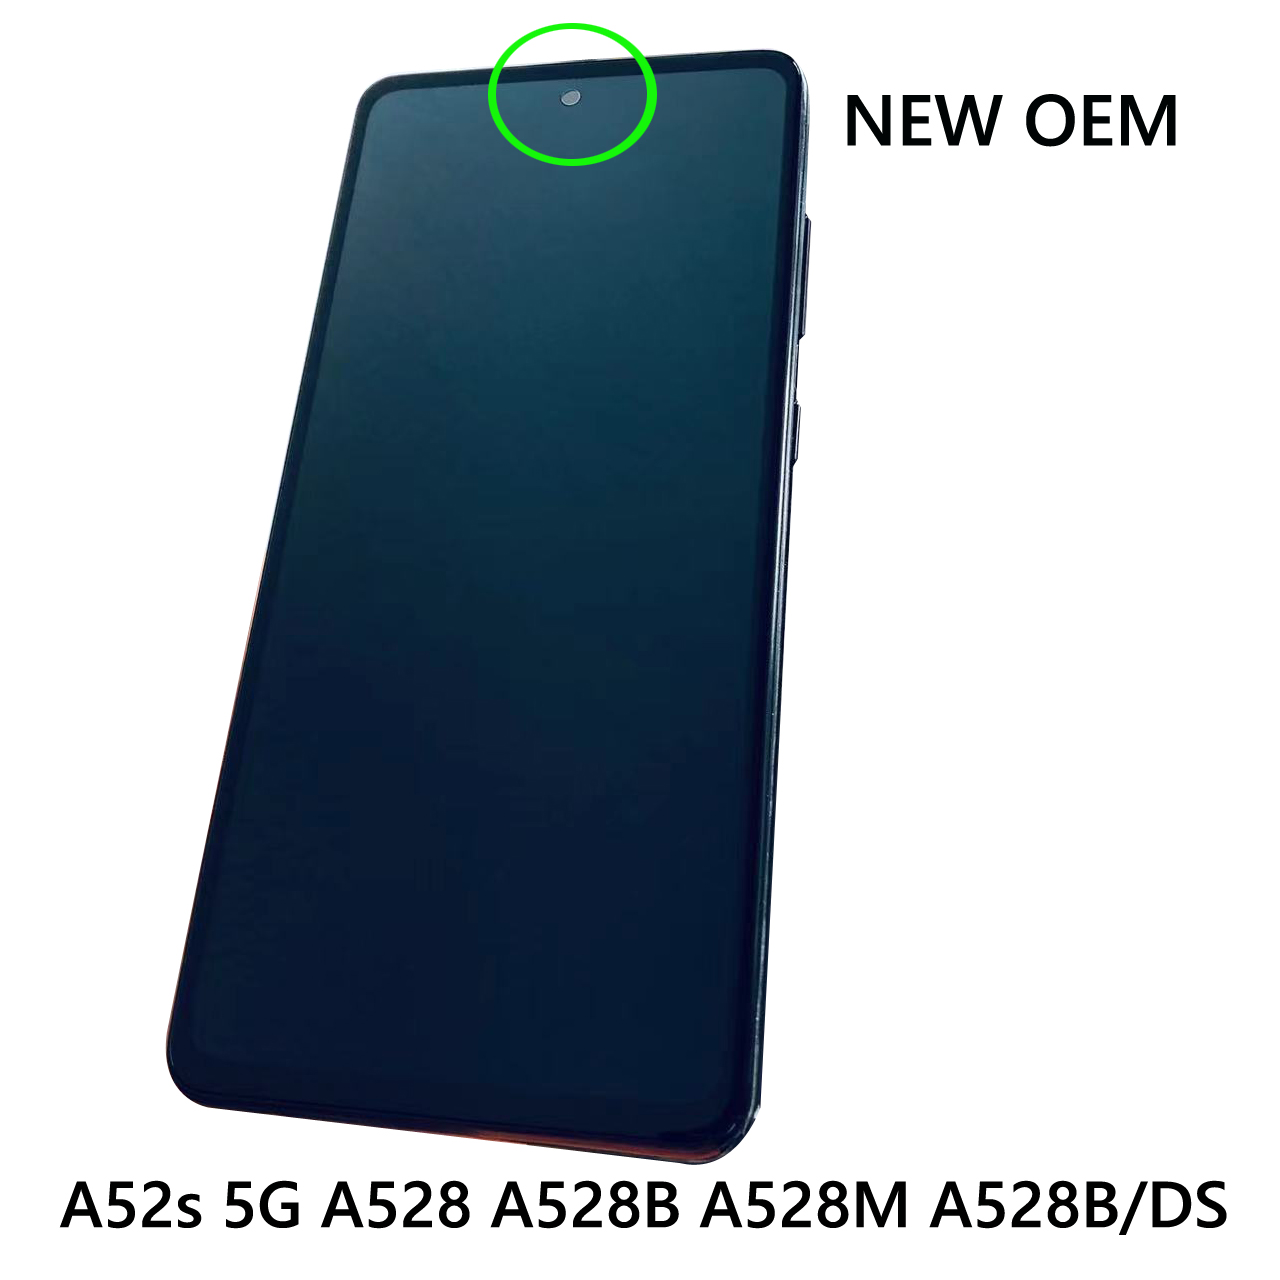 100% NEW OEM 6.5'' AMOLED Display For Samsung Galaxy A52s 5G A528 A528B A528M A528B/DS LCD Touch Screen Digitizer Repair Parts